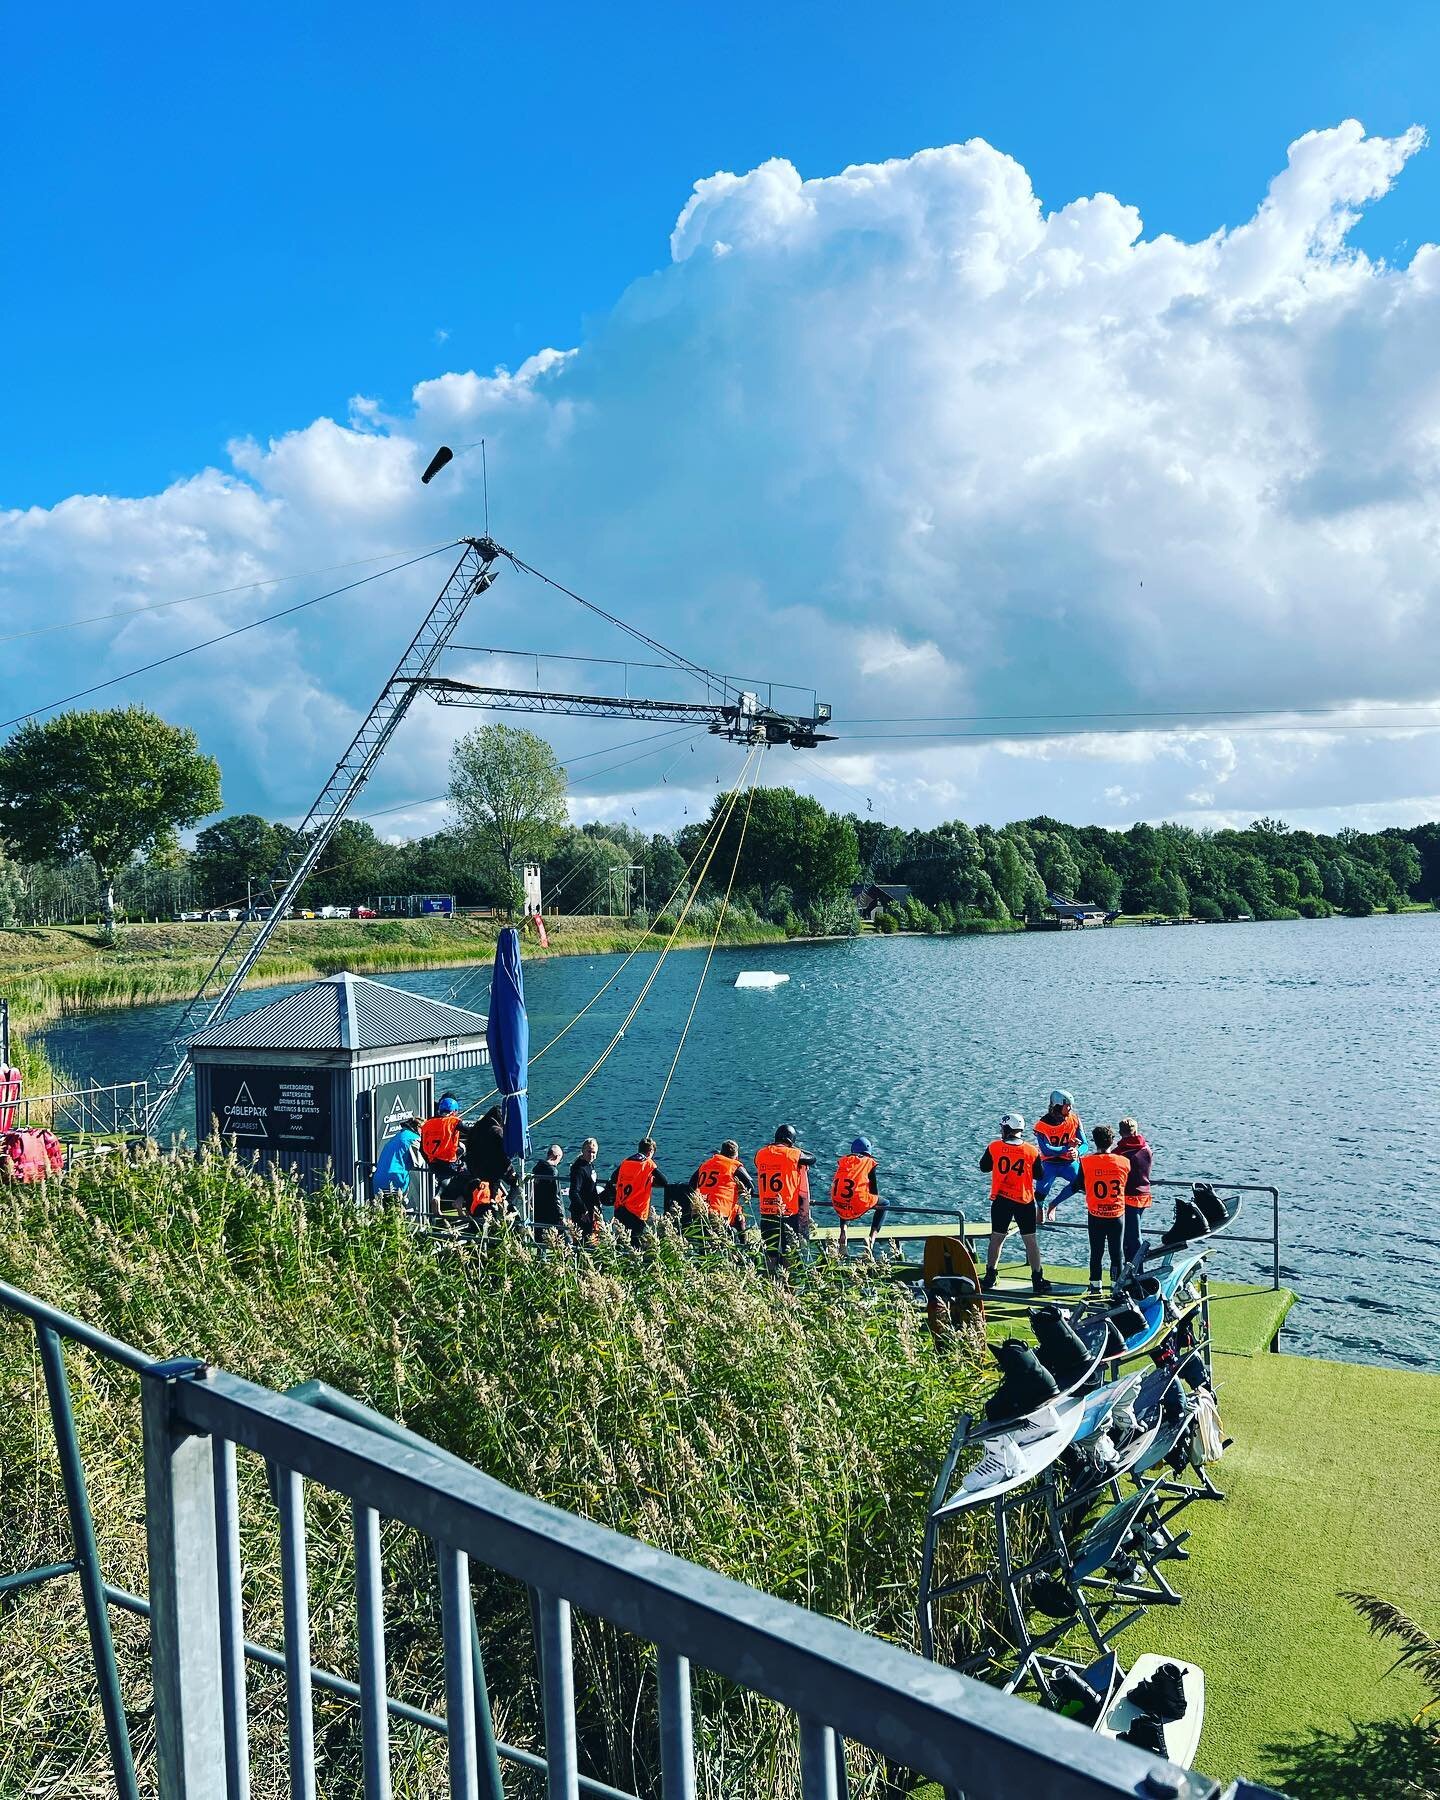 Beautiful day!!! 💙

See you at the Lake! 💦☀

#welovewakeboarden 
#cableparkaquabest #wakeboarding #wakeboard #waterski #cablepark #wake #wakeskate #cable #watersport #waterski